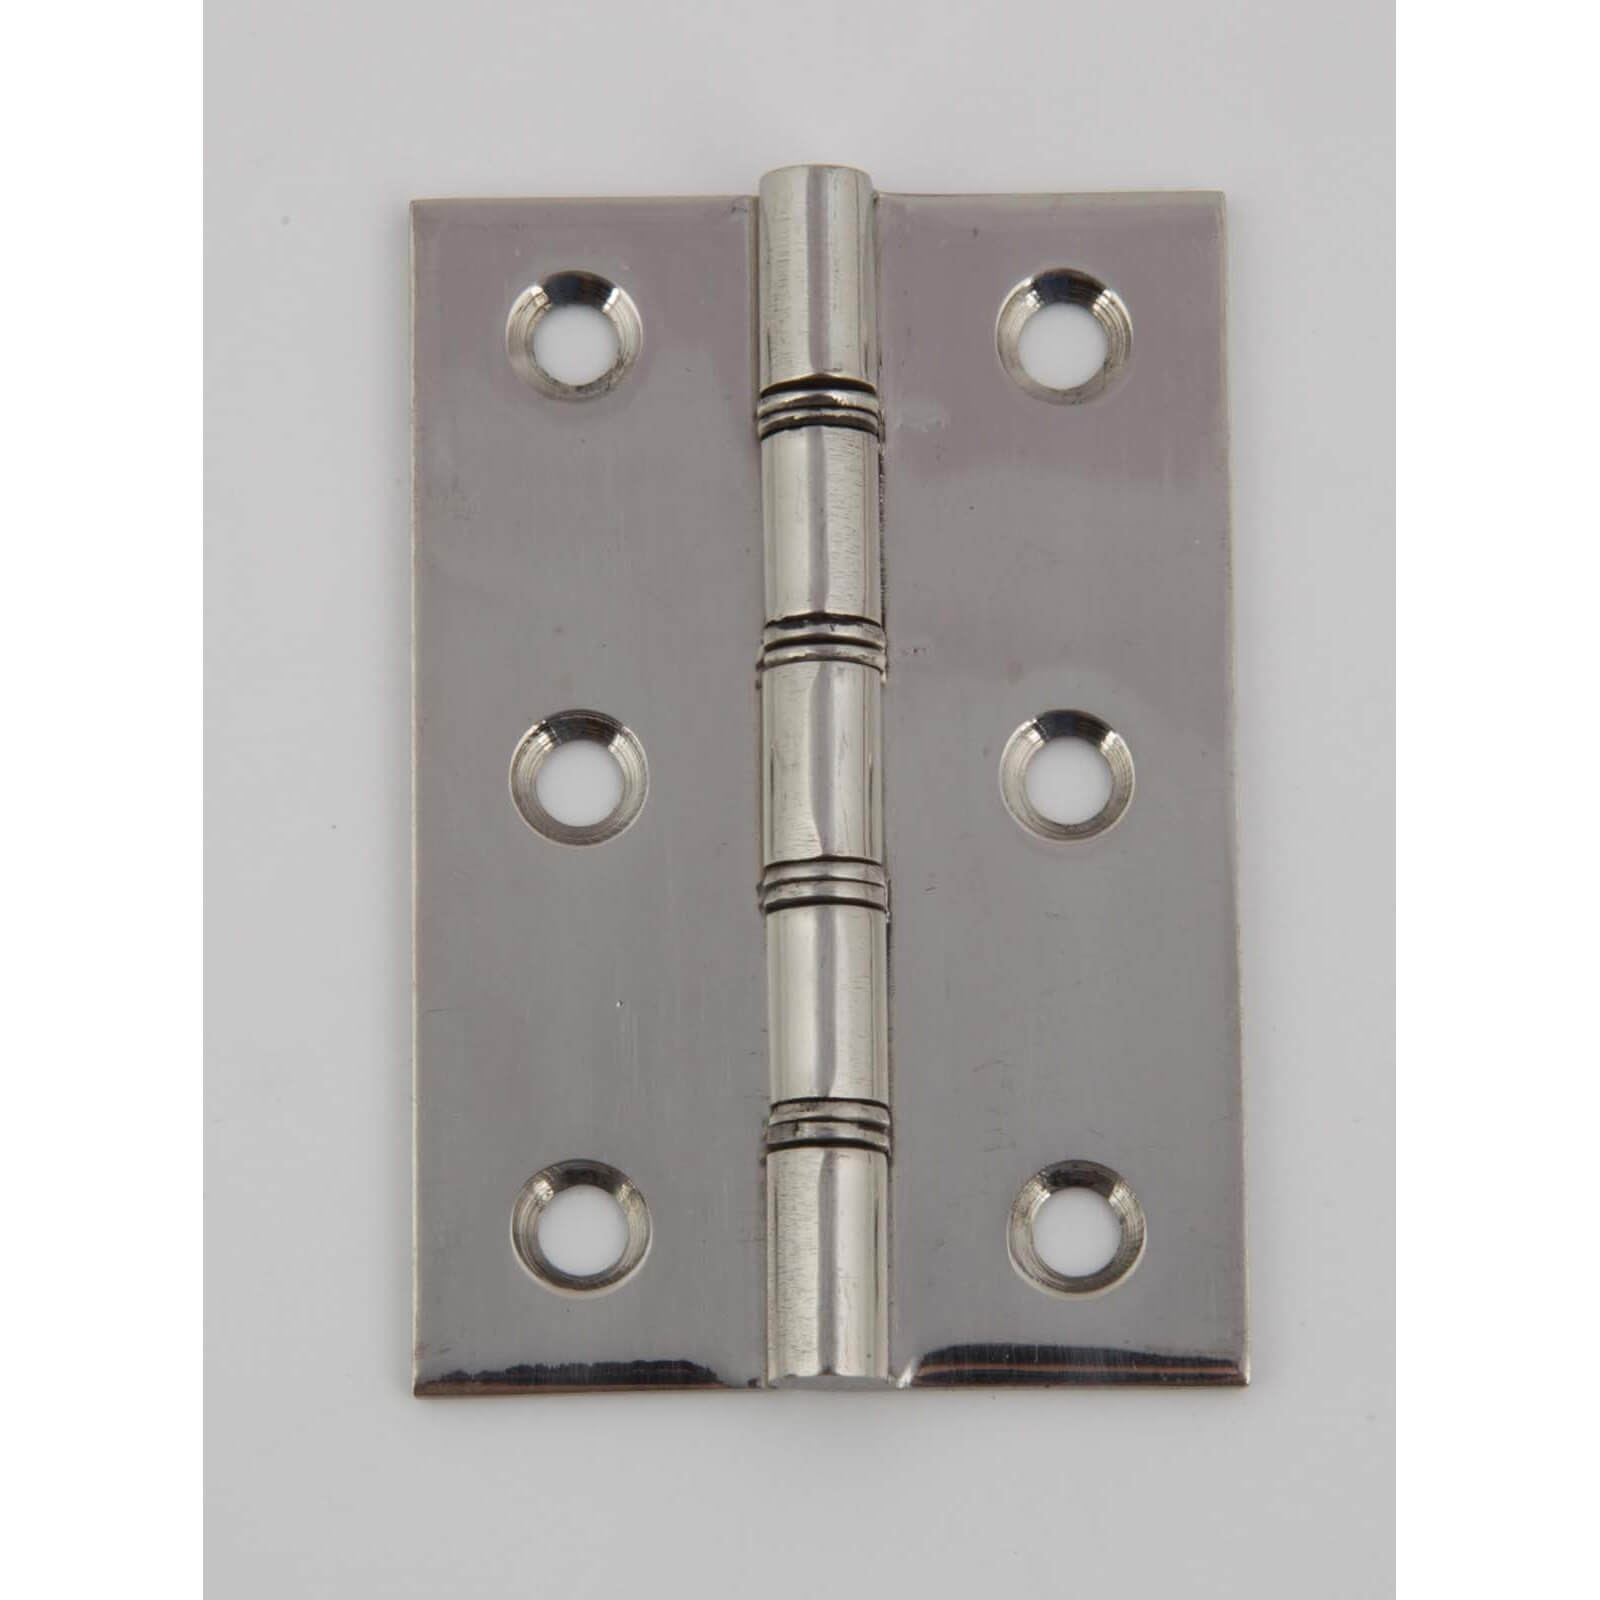 Hafele Steel Washered Butt Hinge - Polished Stainless Steel - 75 x 51mm - 2 Pack